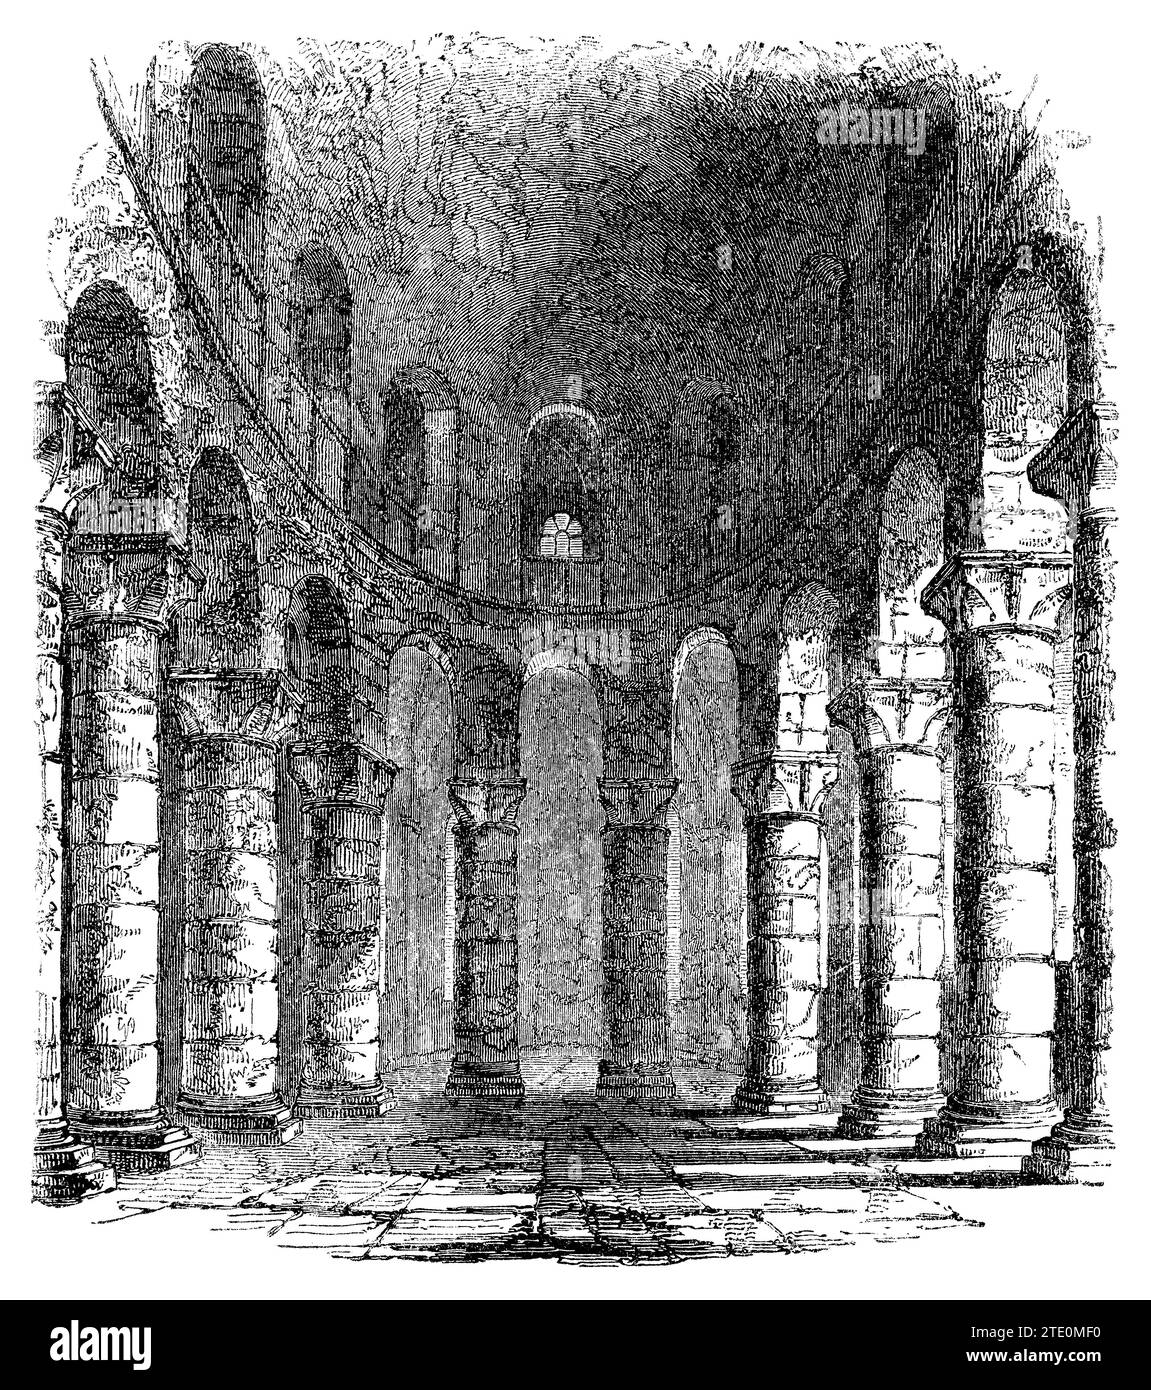 Vintage 1854 engraving of the interior of St. John's Chapel in the White Tower of the Tower of London, England. Stock Photo